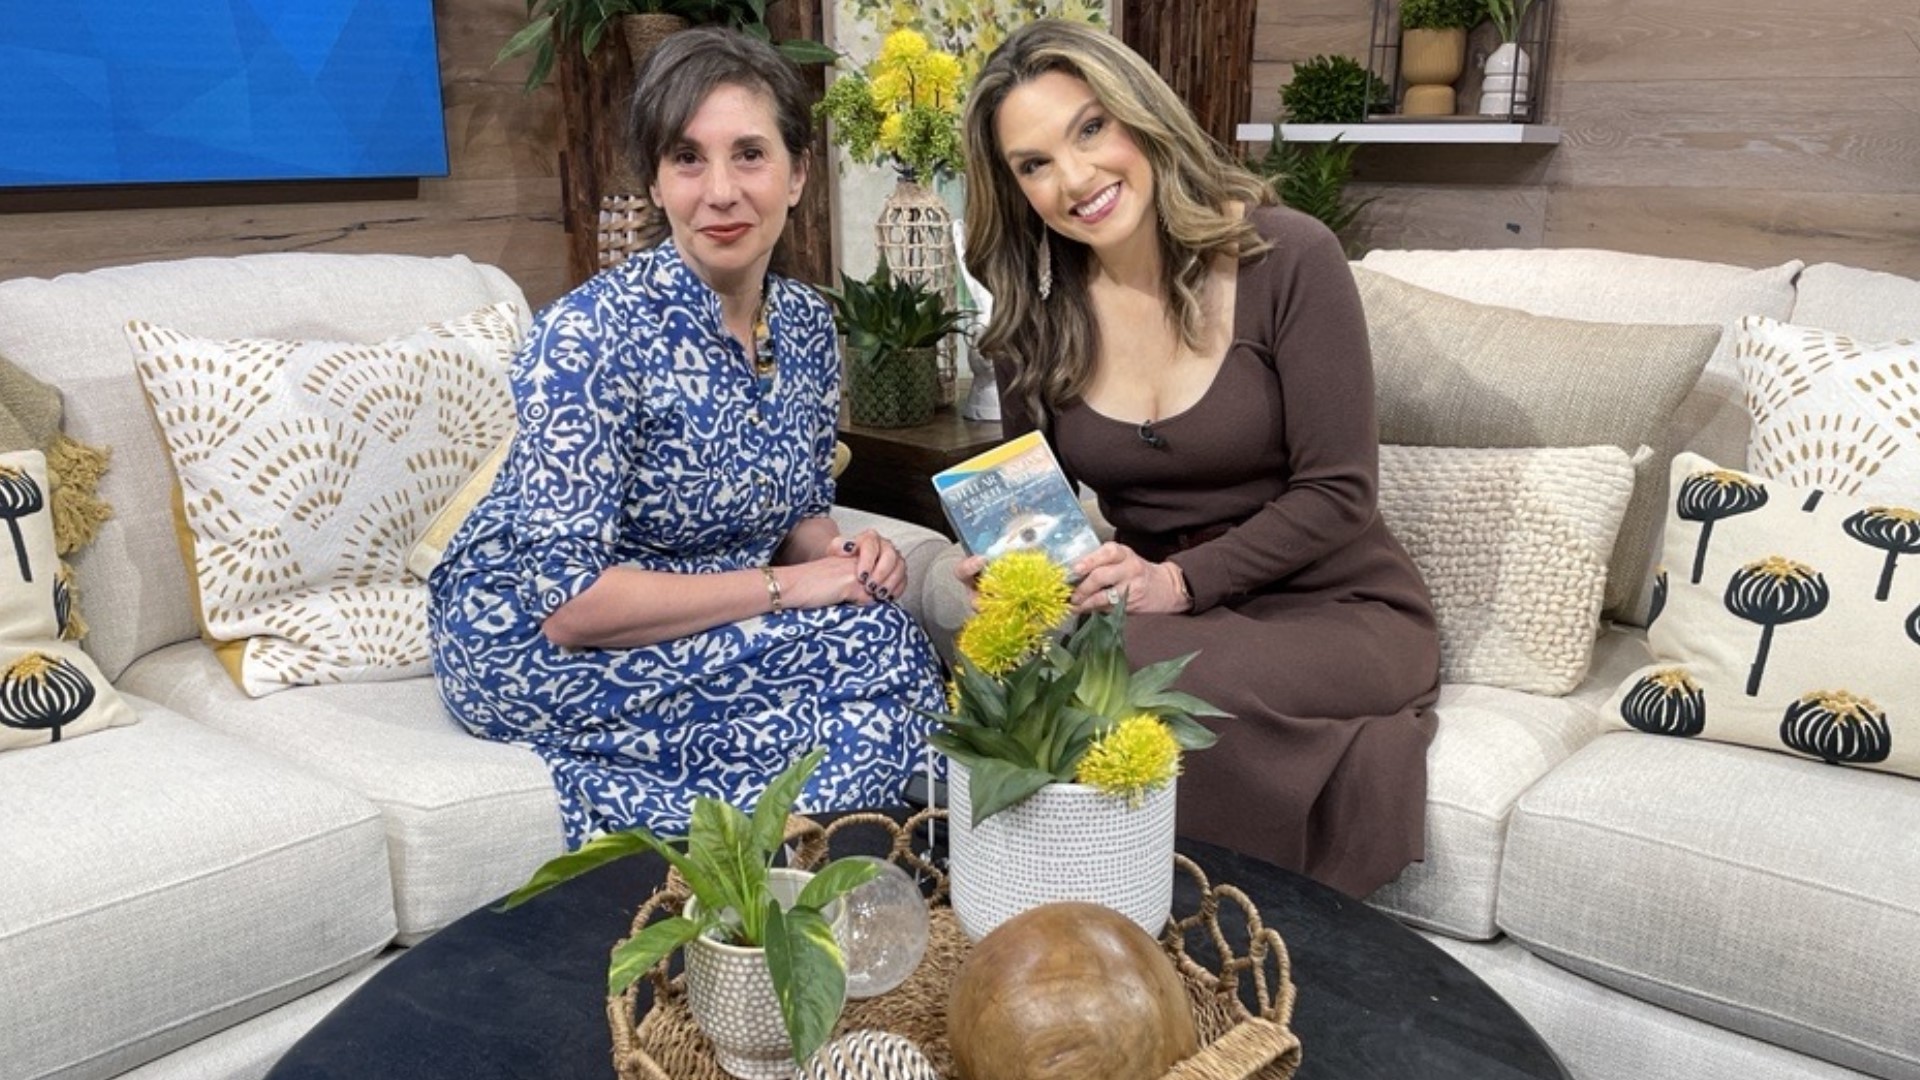 Stephanie Gailing, author of "Astrological Self Care," joined the show to discuss what it means when Saturn goes into Pisces this month. #newdaynw